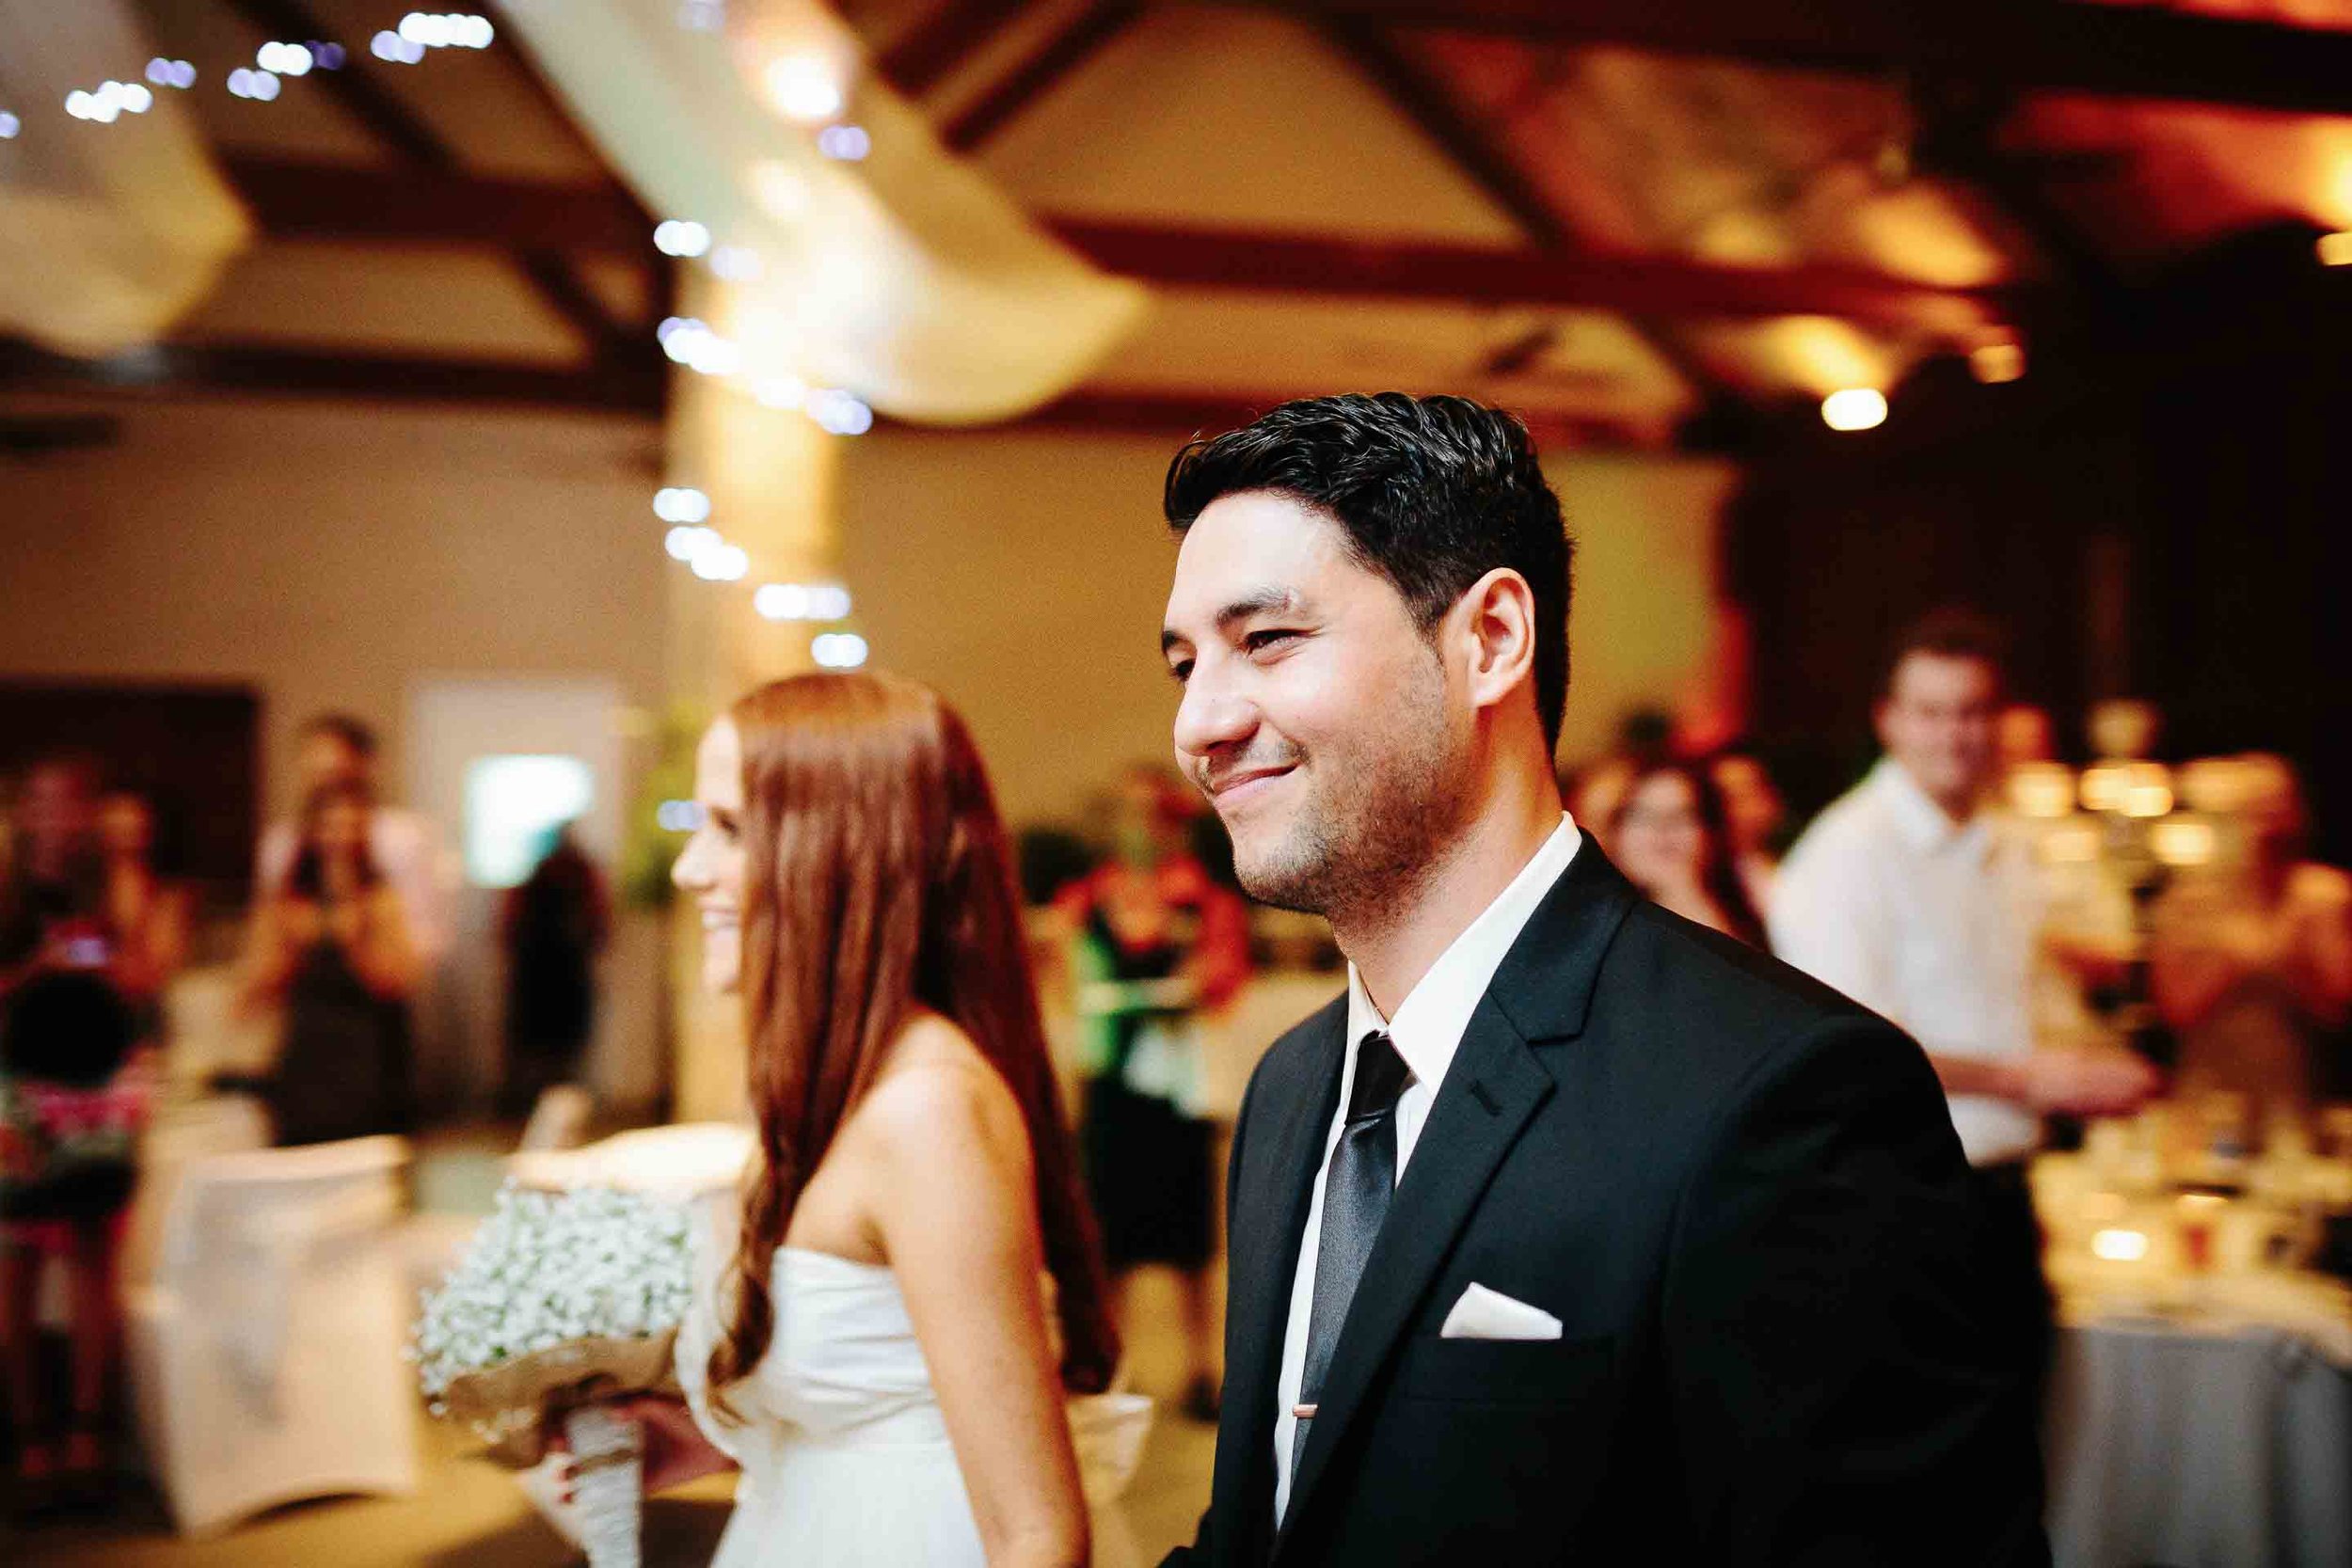 groom smiling as he leads his bride to their dinner table